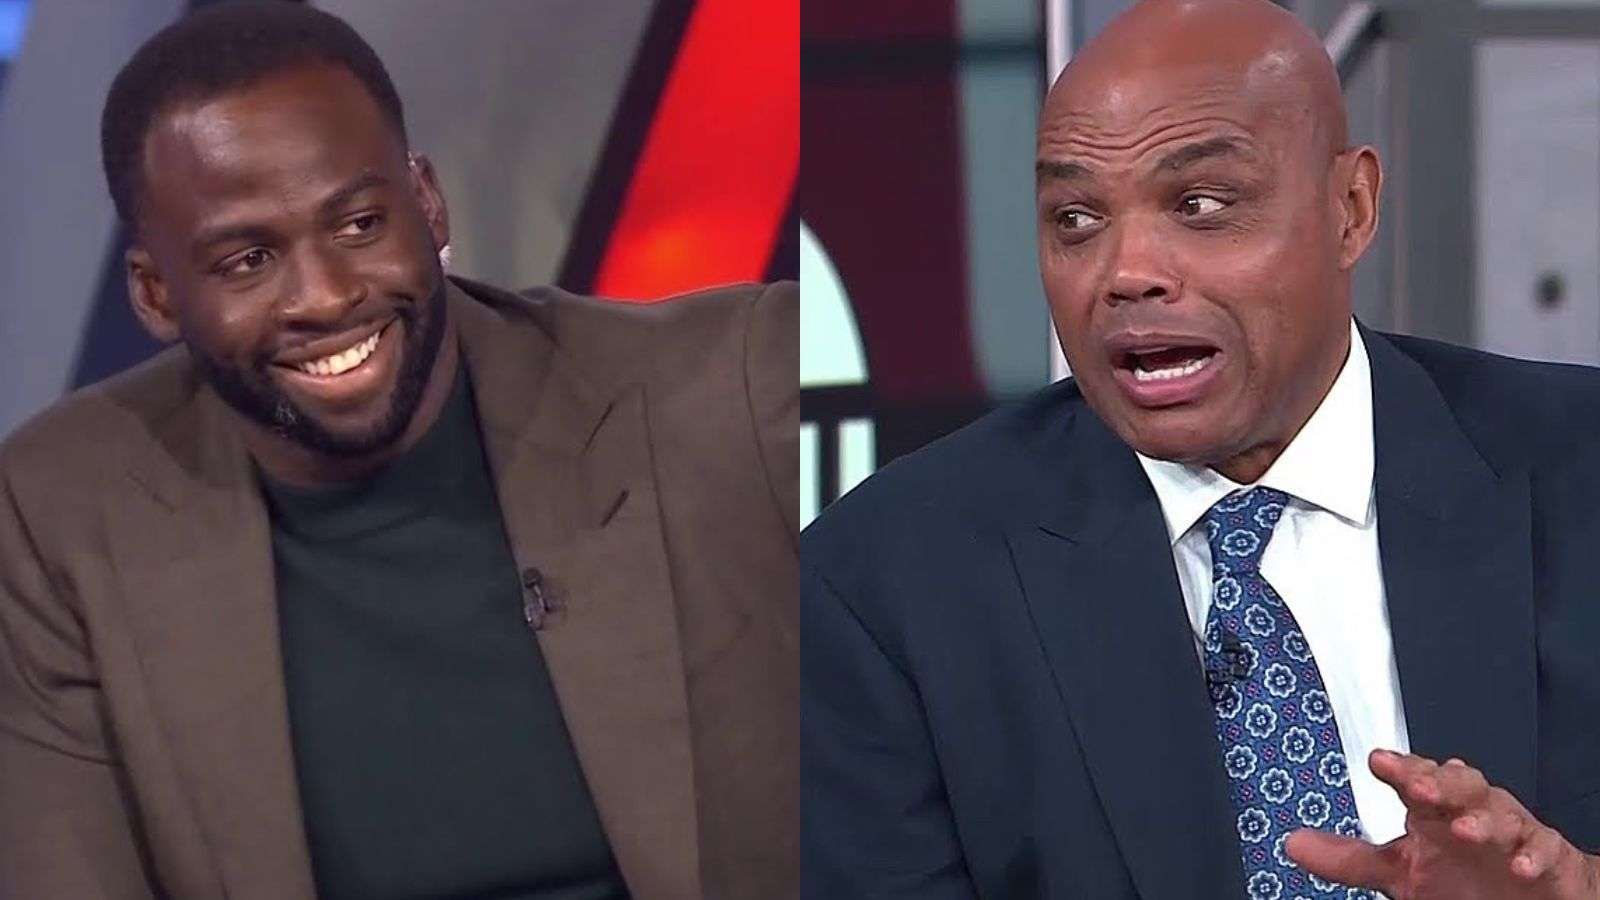 Draymond Green and Charles Barkley in separate episodes of TNT's Inside the NBA.